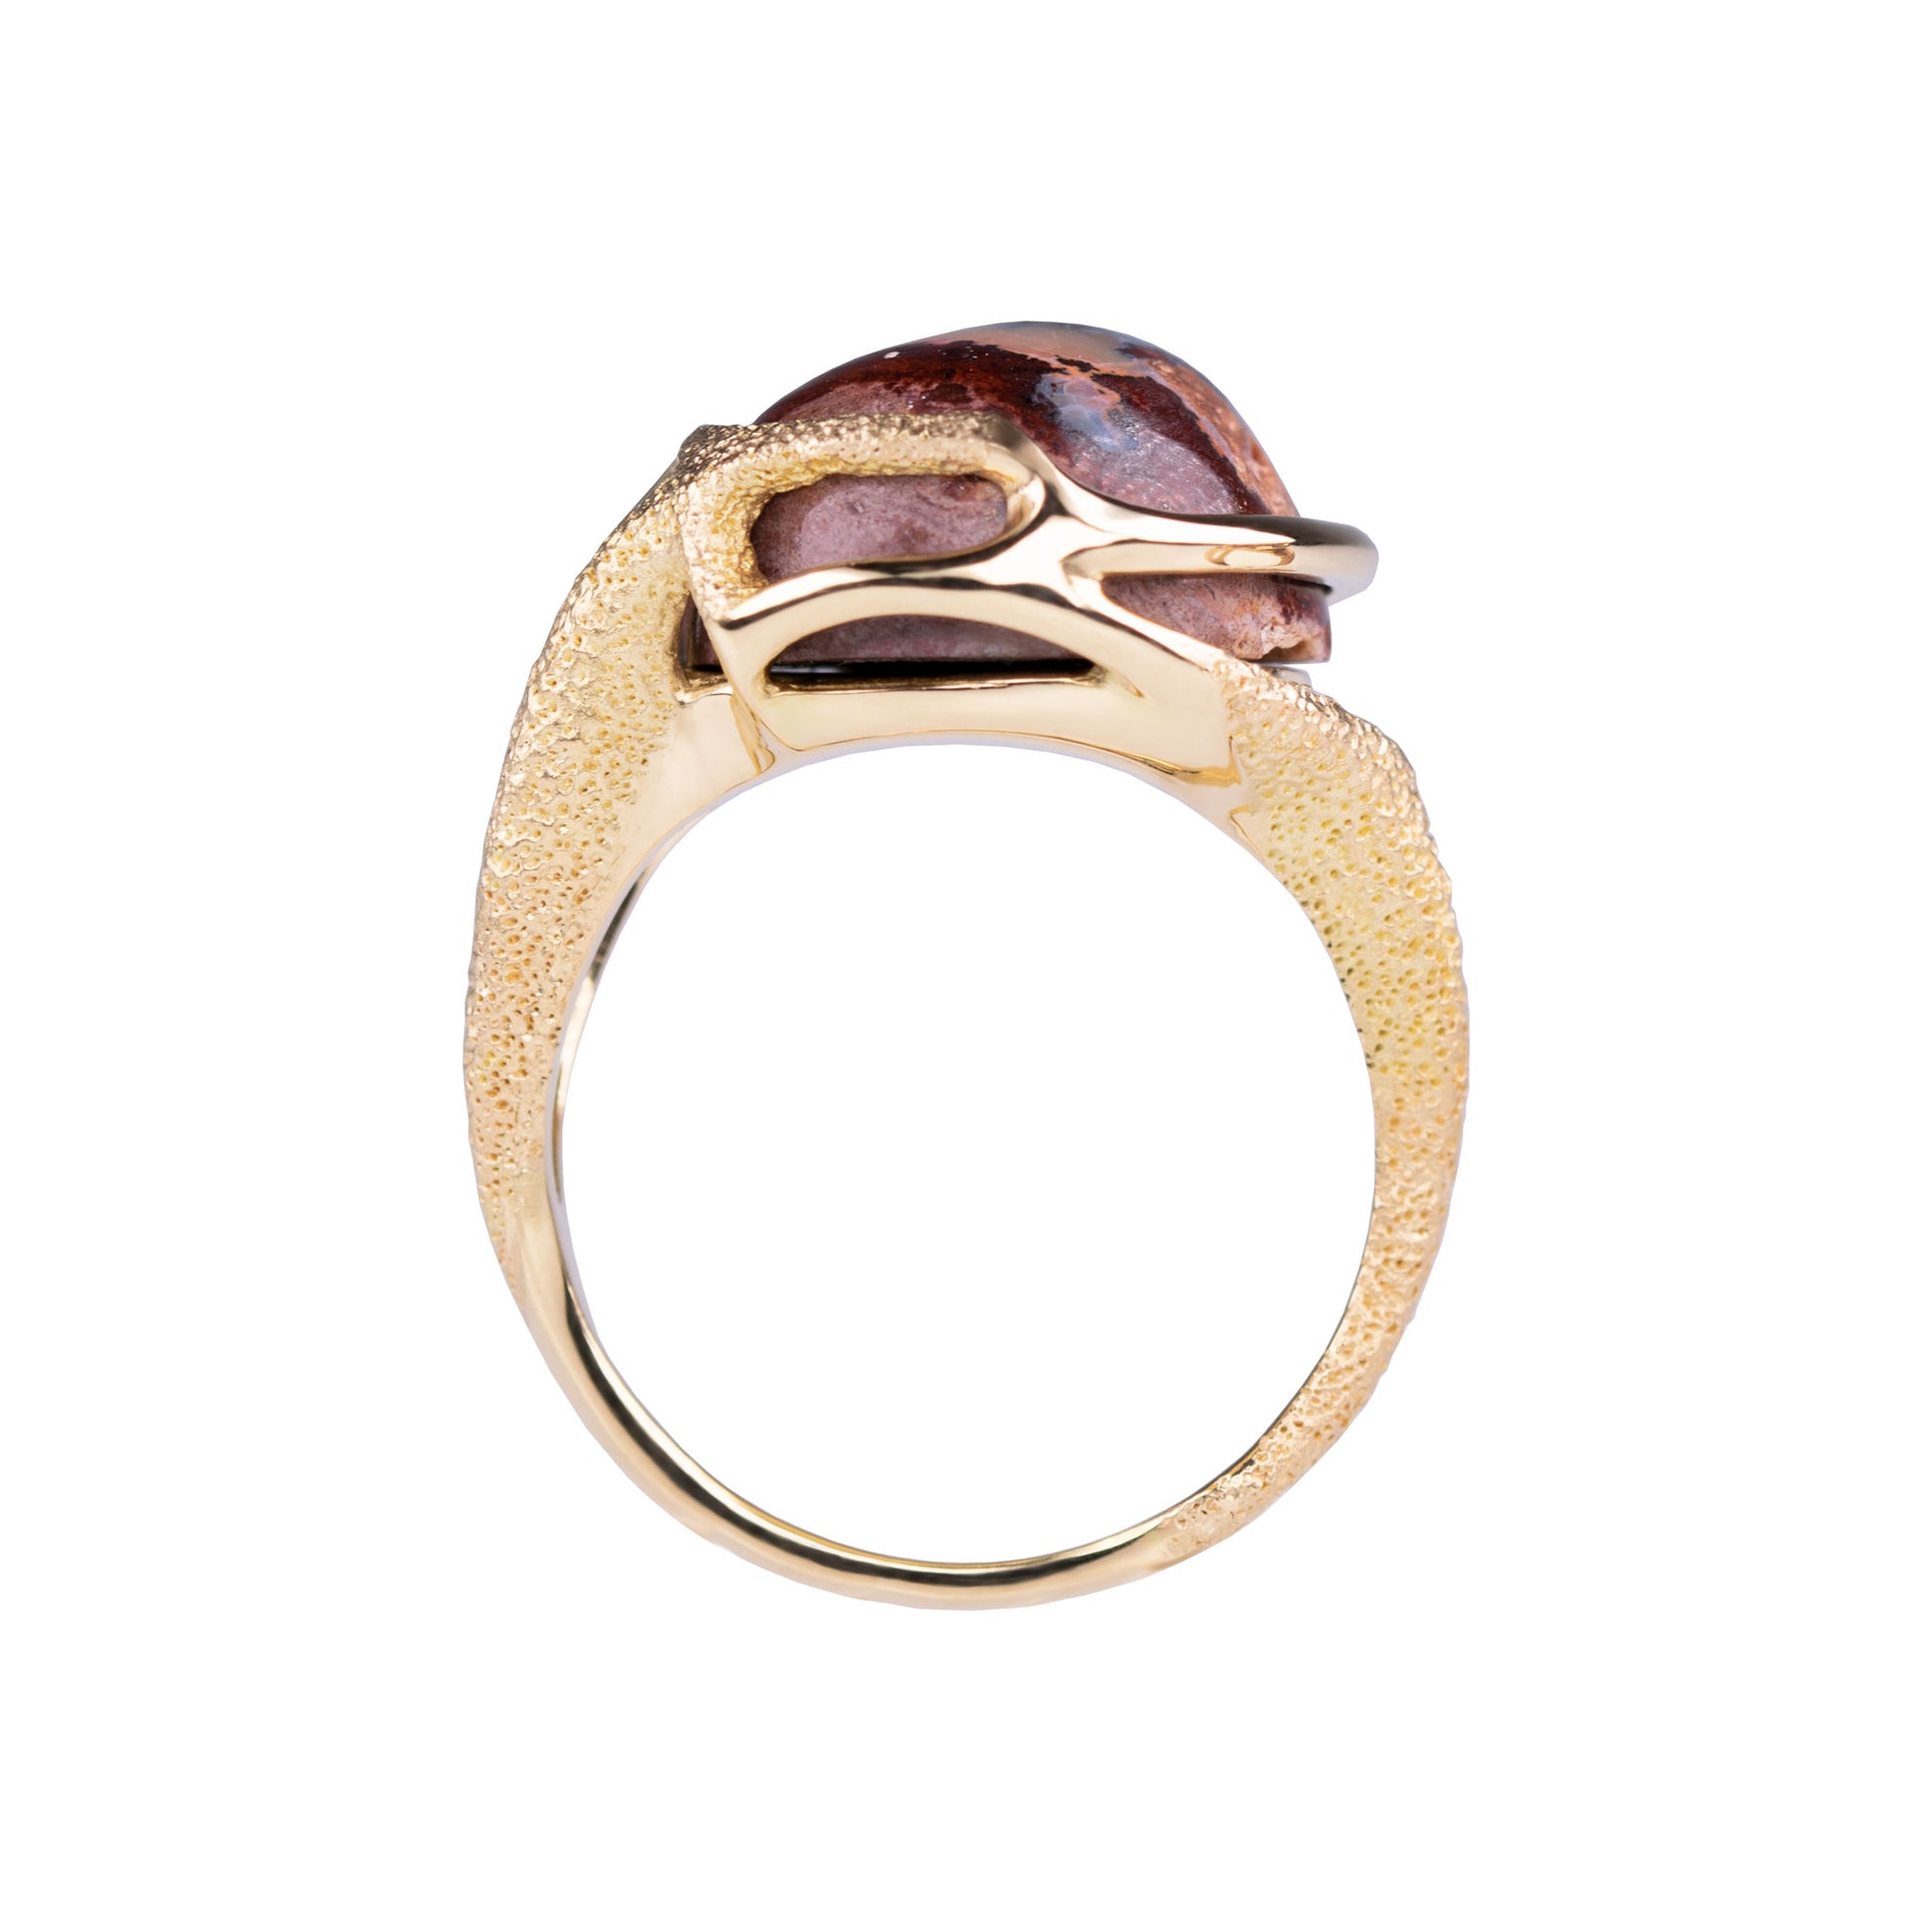 Orme-Brown Contemporary Fine Jewellery Ethical Statement Arrow ring in sustainable recycled 18ct yellow gold and a round Mexican fire opal cabochon (TipToe)